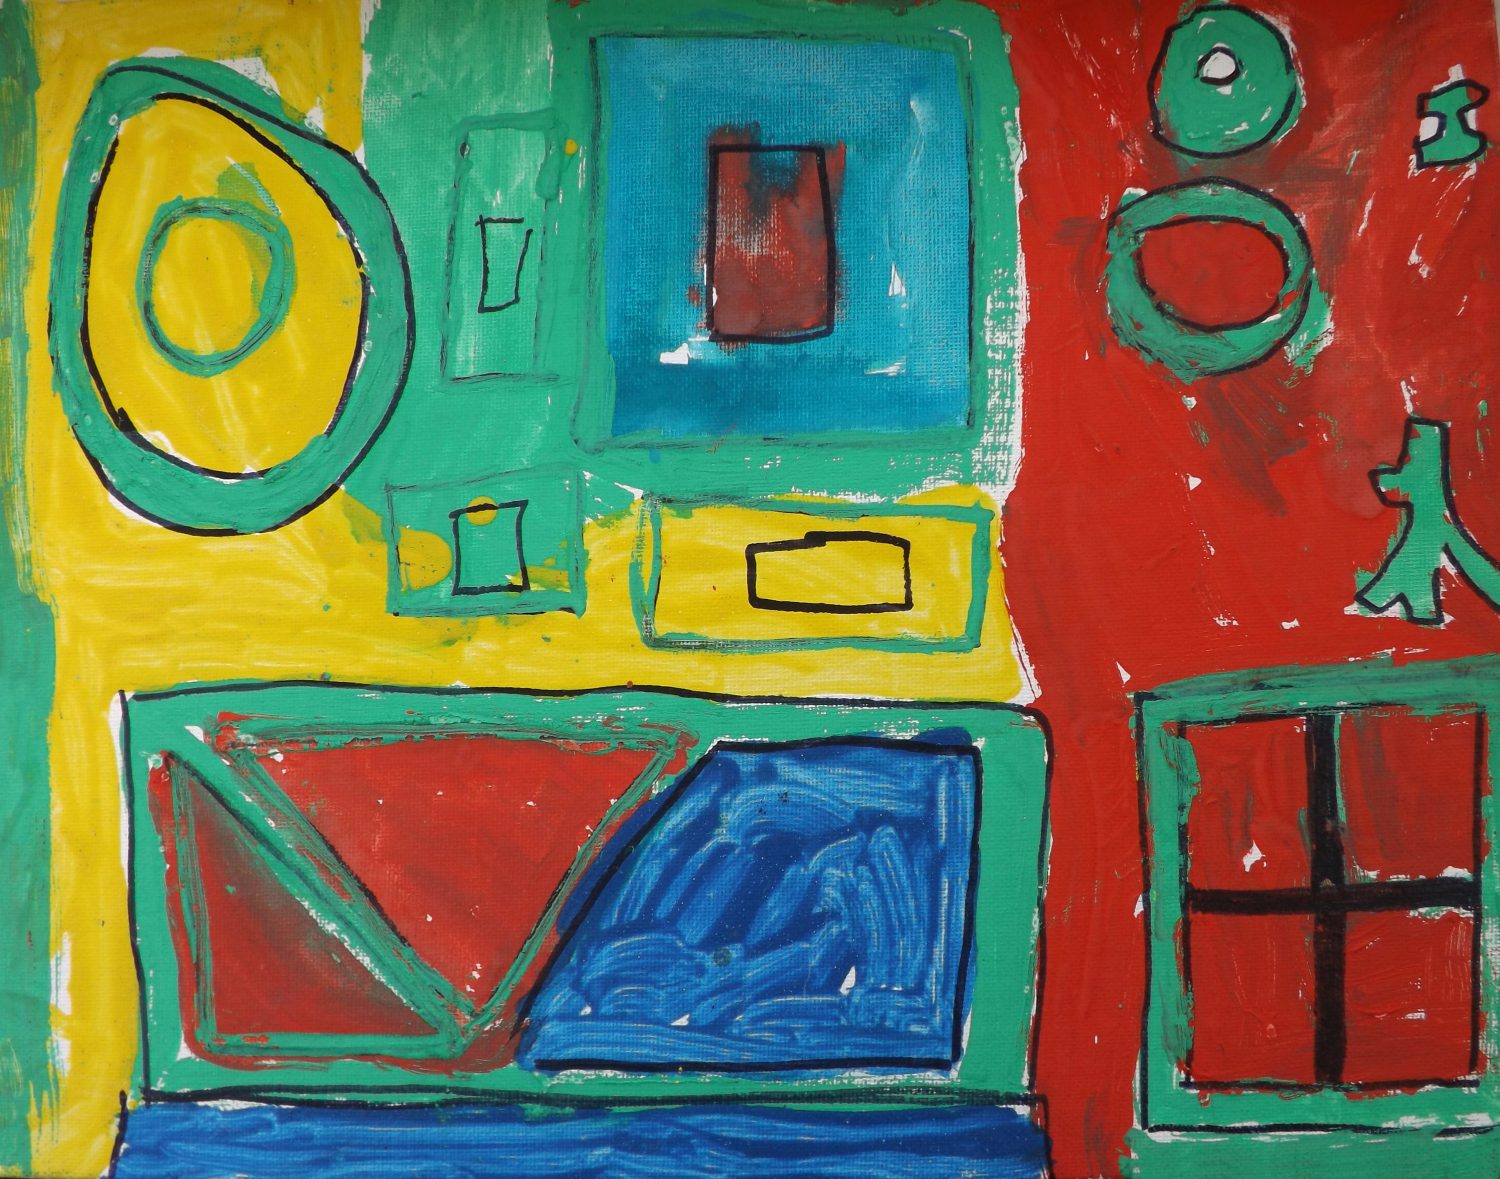 thumbnail of Home Away From Home by John S. Medium: Acrylic on canvas. Date 2014